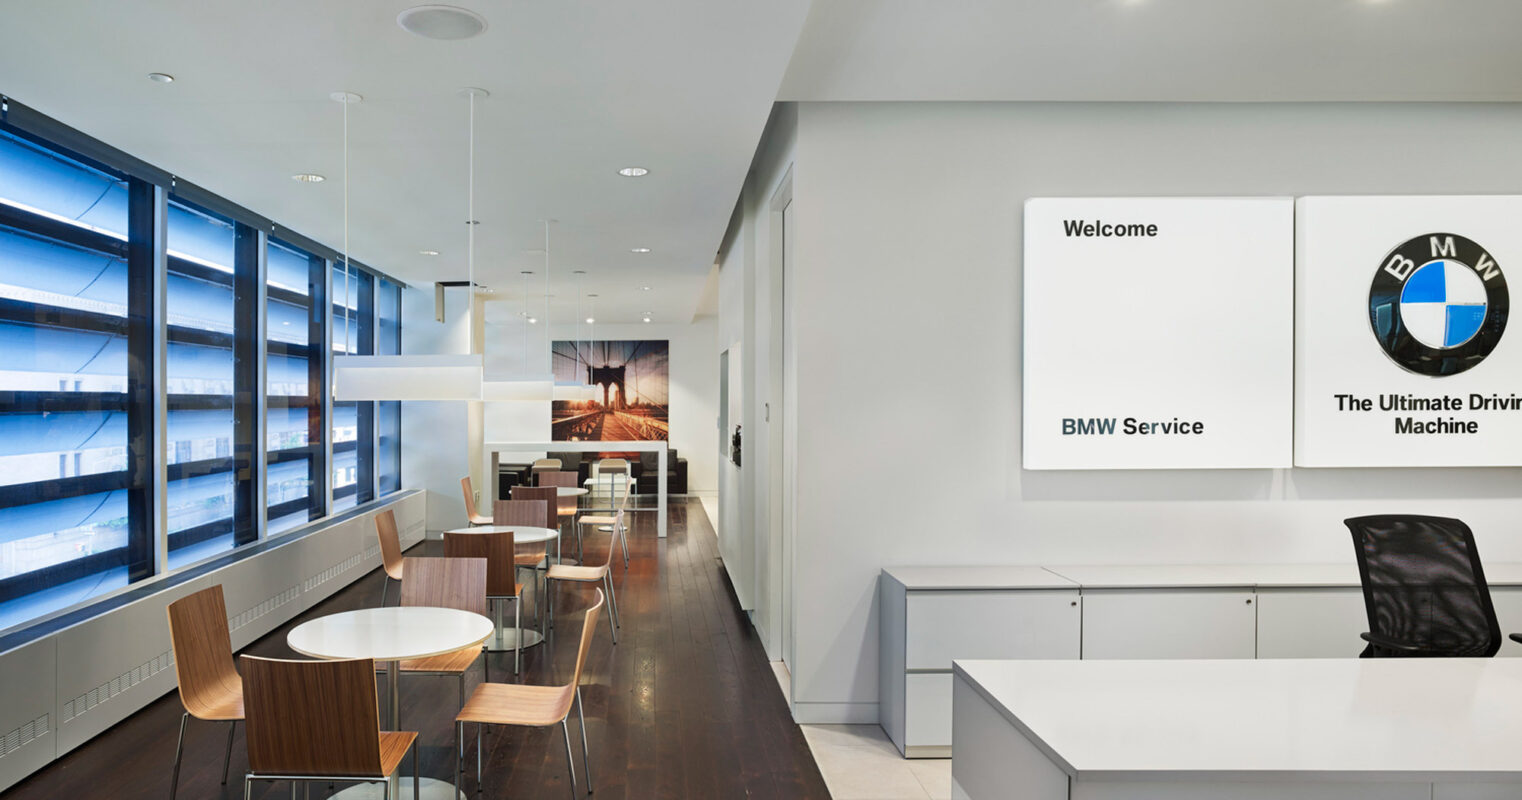 Clean and modern car dealership customer waiting area with seating, large windows, and BMW branding on the wall.